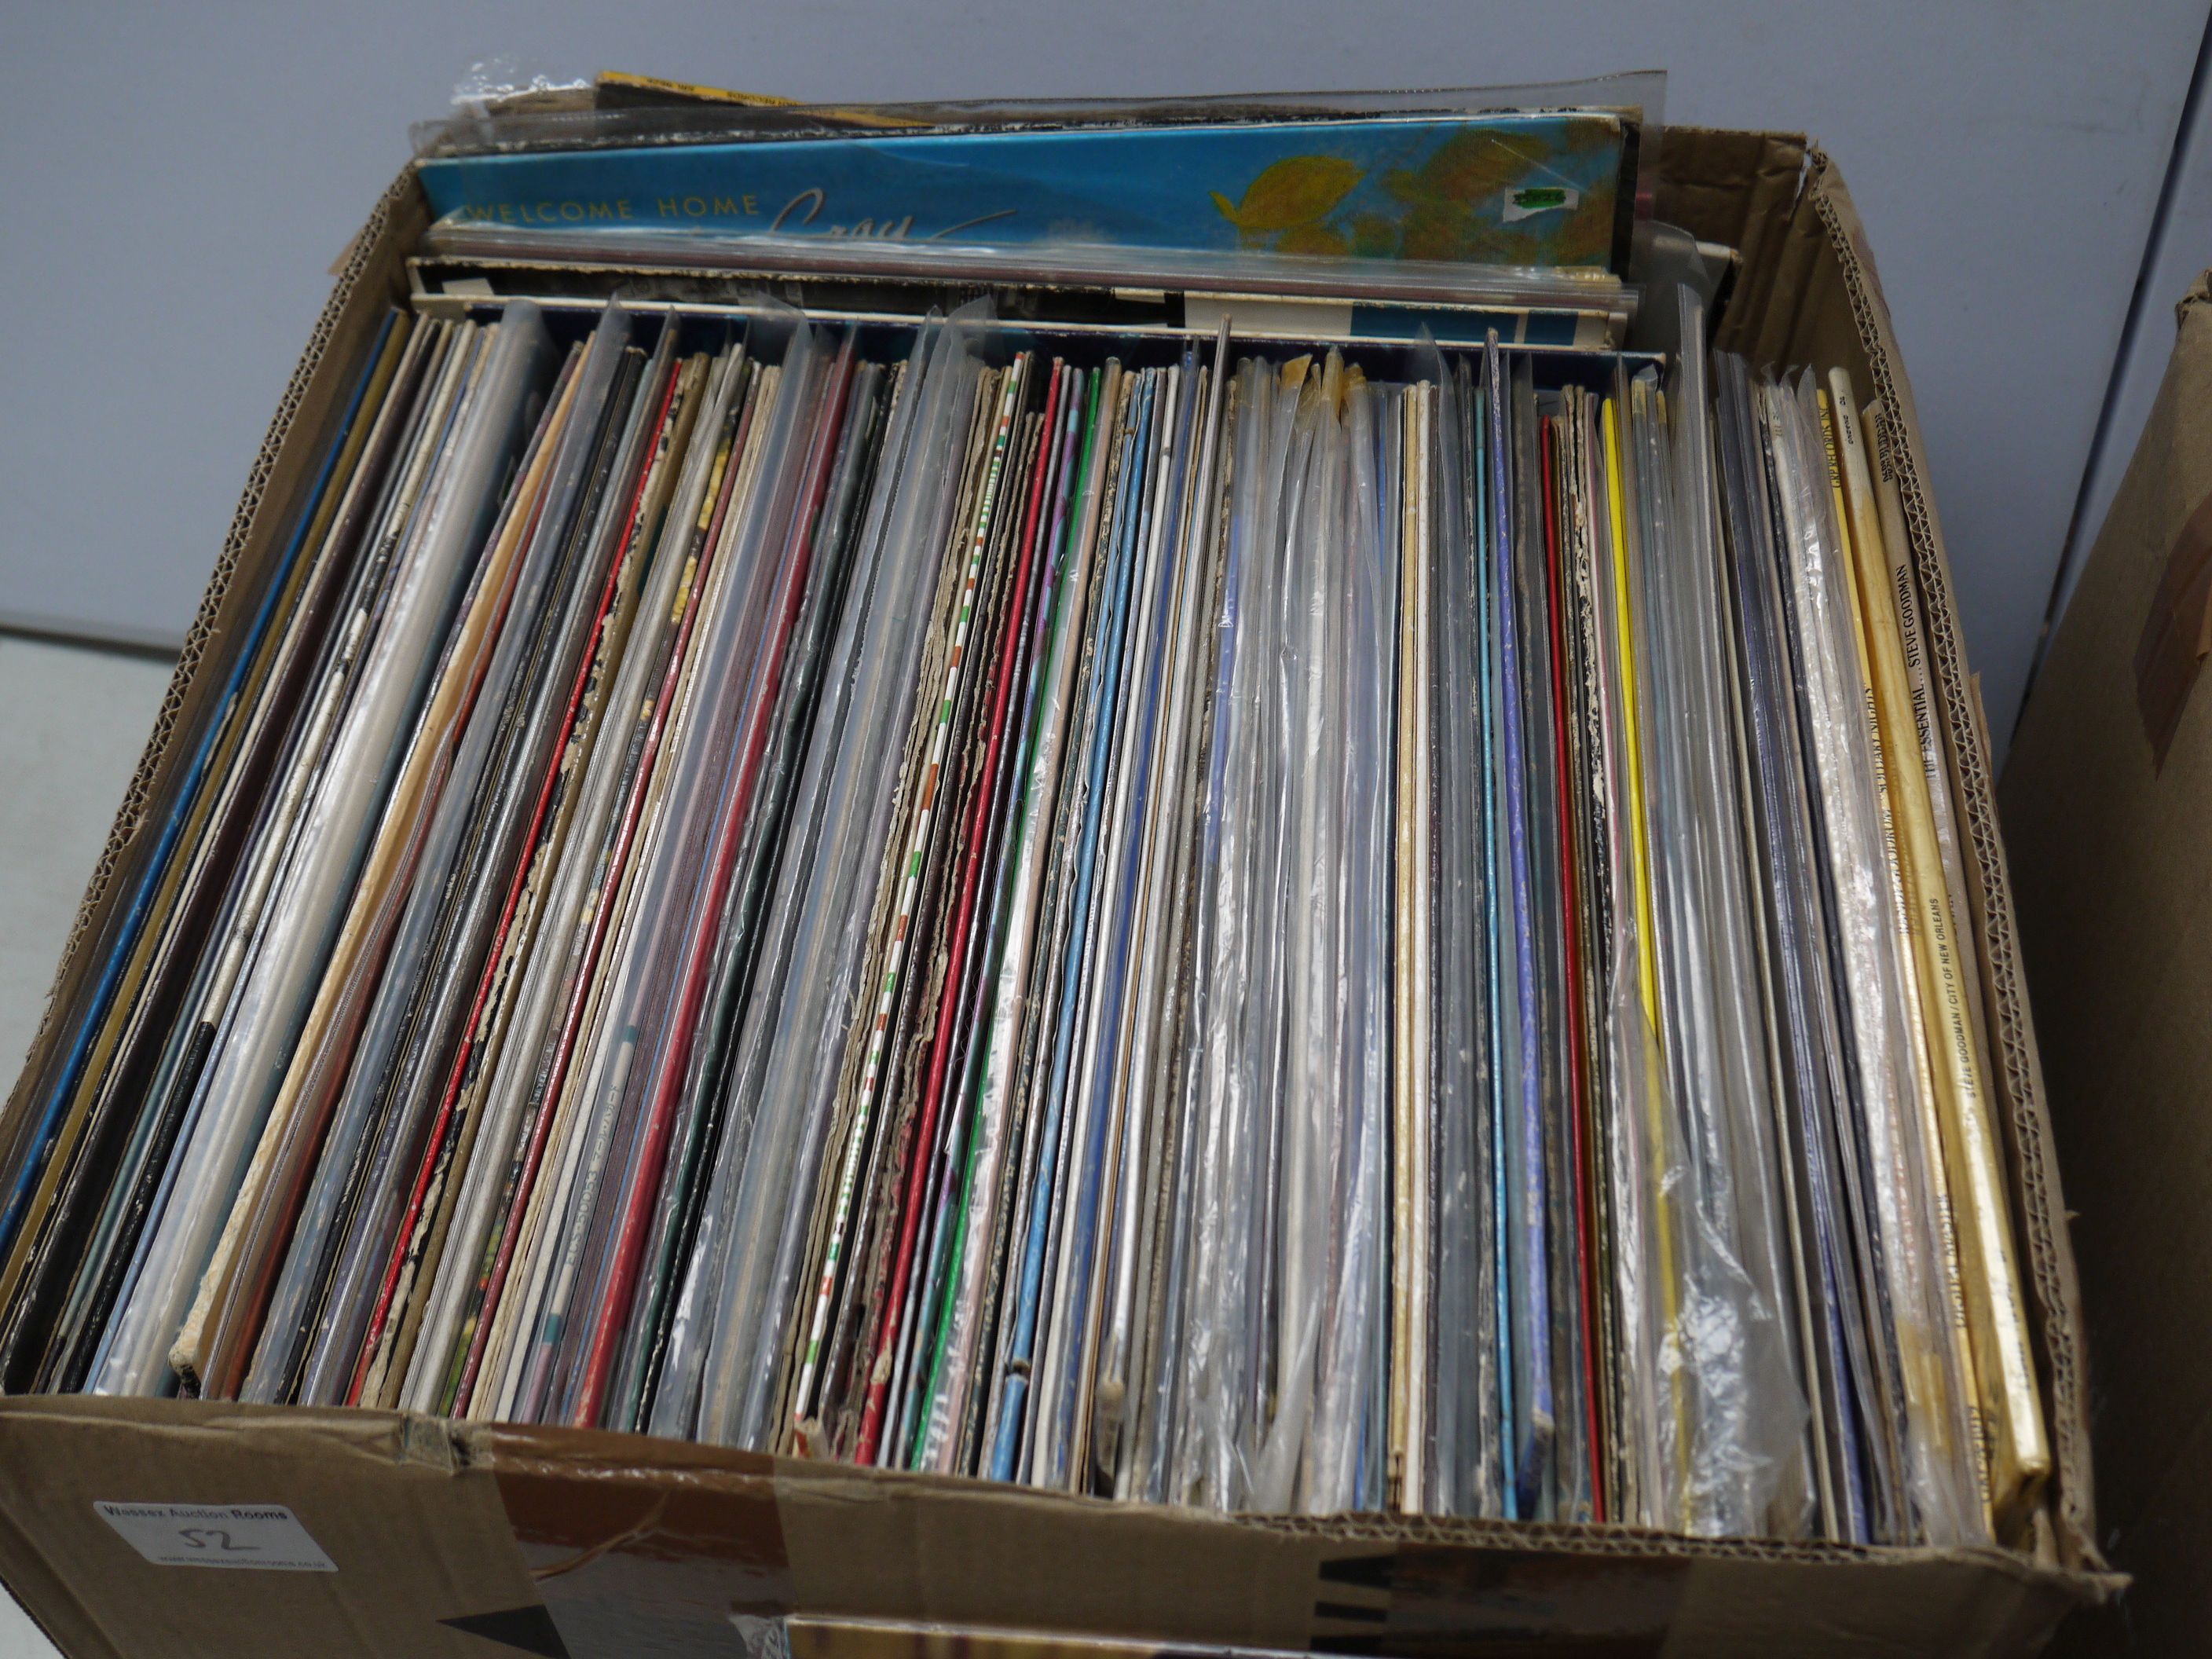 Vinyl - Around 200 LPs featuring country, easy listening, Motown, rock etc, to include Al Green, - Image 4 of 5